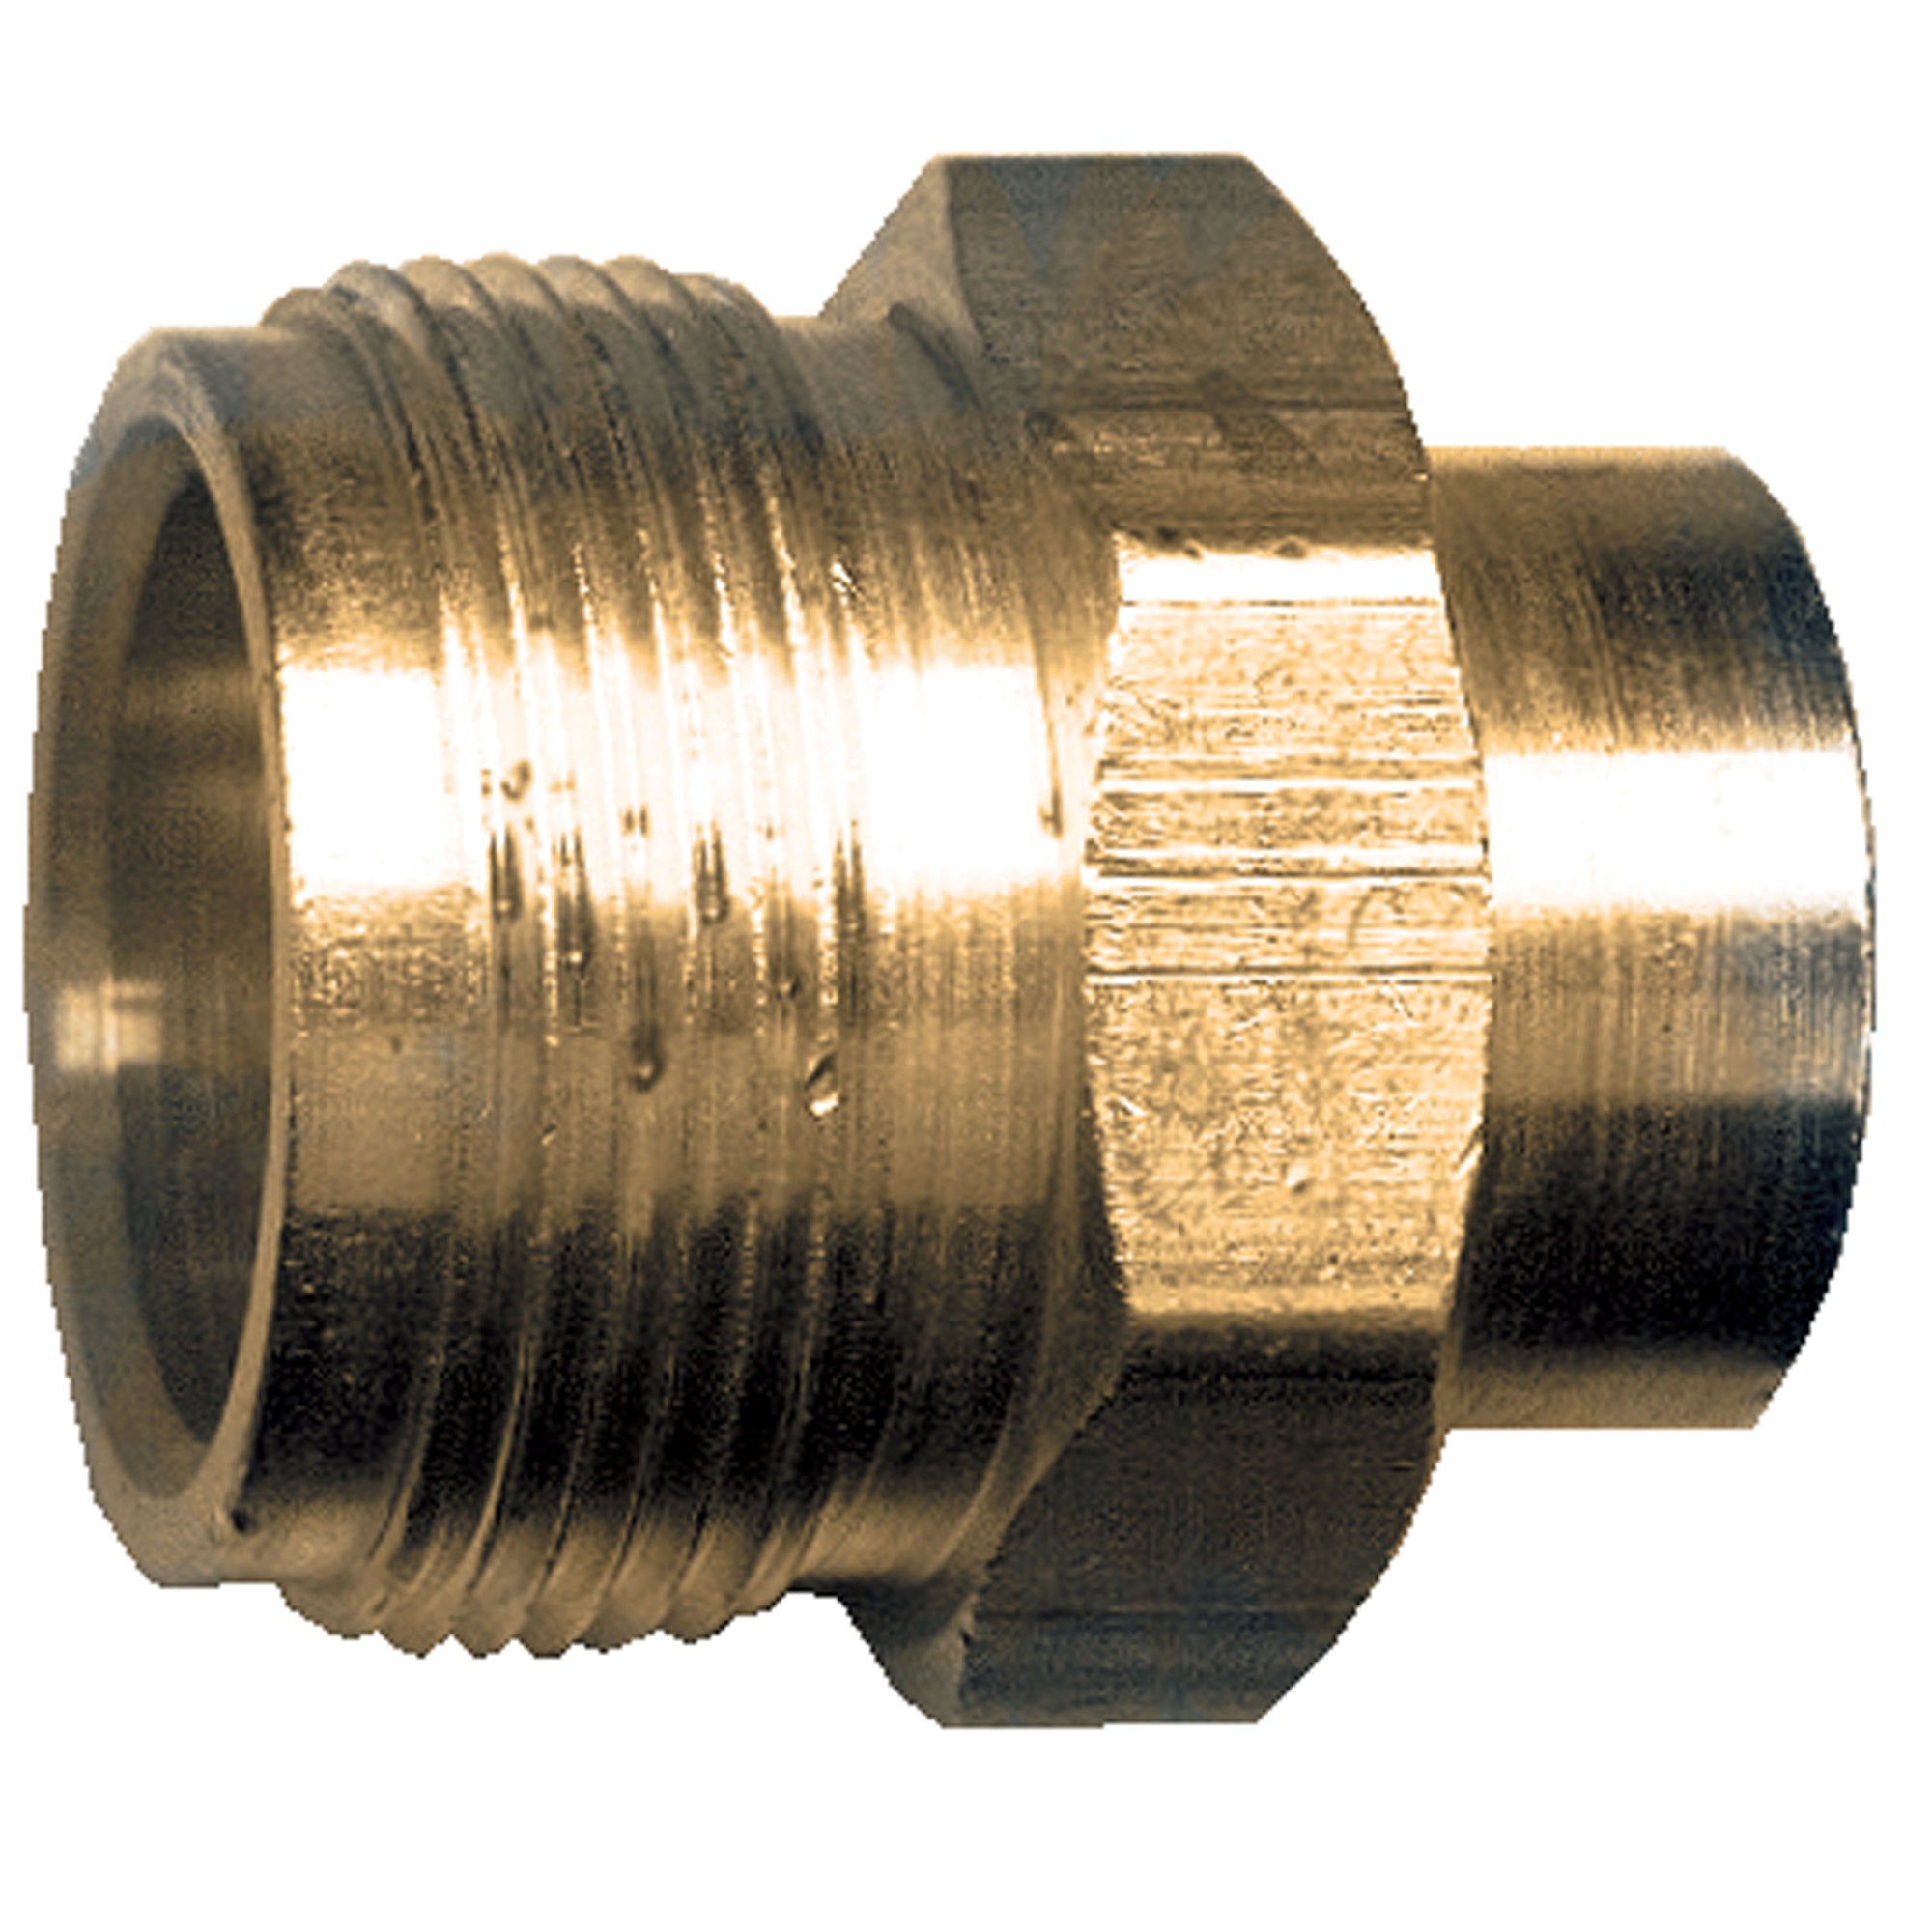 JR Products 07-30145 Cylinder Thread Adapter - Male 1"-20 Cylinder Thread x 1/4" FPT